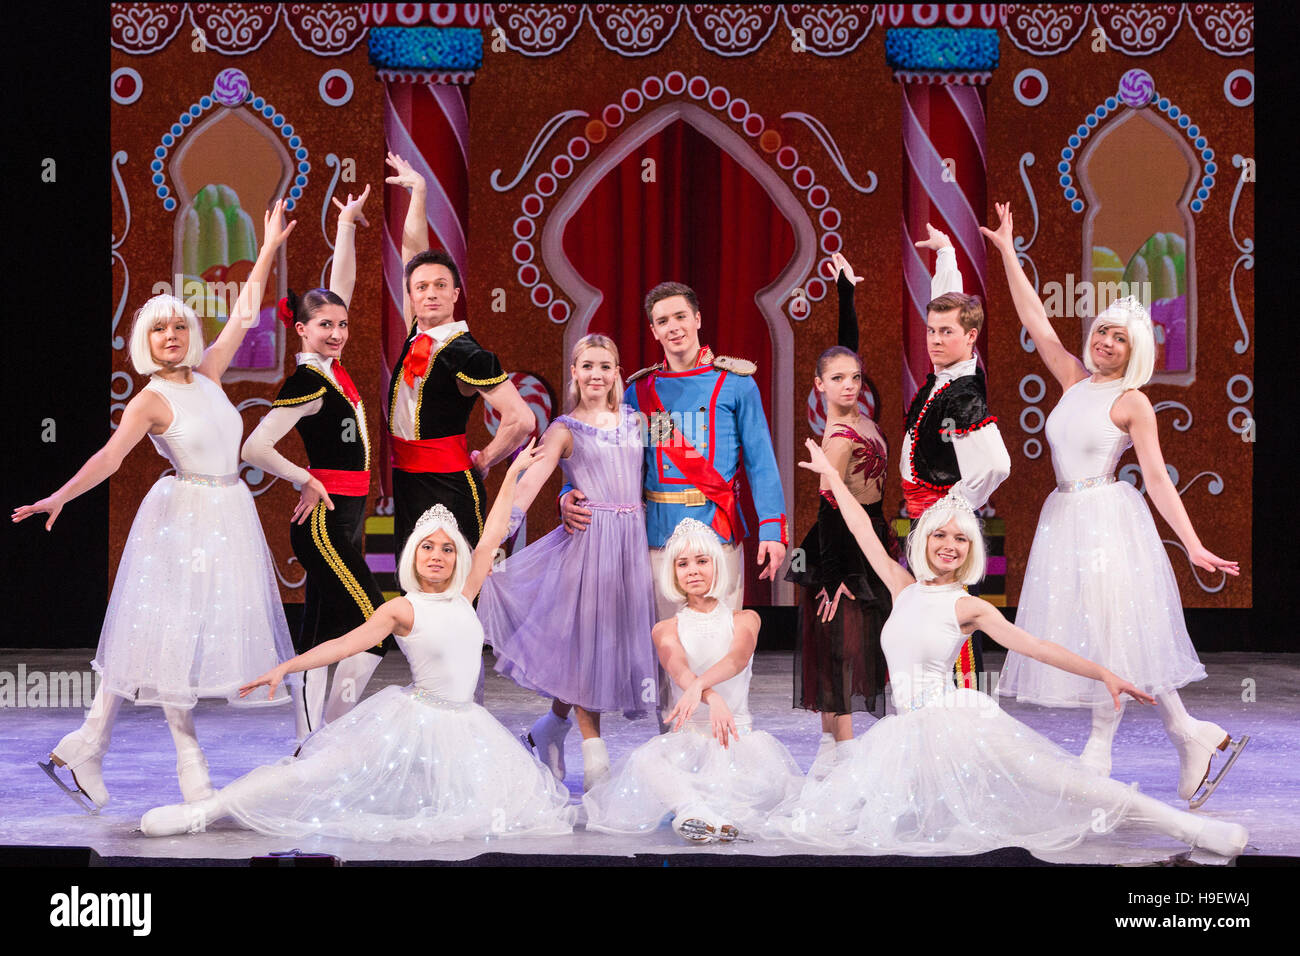 London, UK. 21 November 2016. The Imperial Ice Stars perform The Nutcracker on Ice at the Winter Palace Theatre in the Hyde Park Winter Wonderland from 18 November 2016 to 2 January 2017. This new theatrical attraction for 2016 celebrates the Winter Wonderland's 10th anniversary. Stock Photo